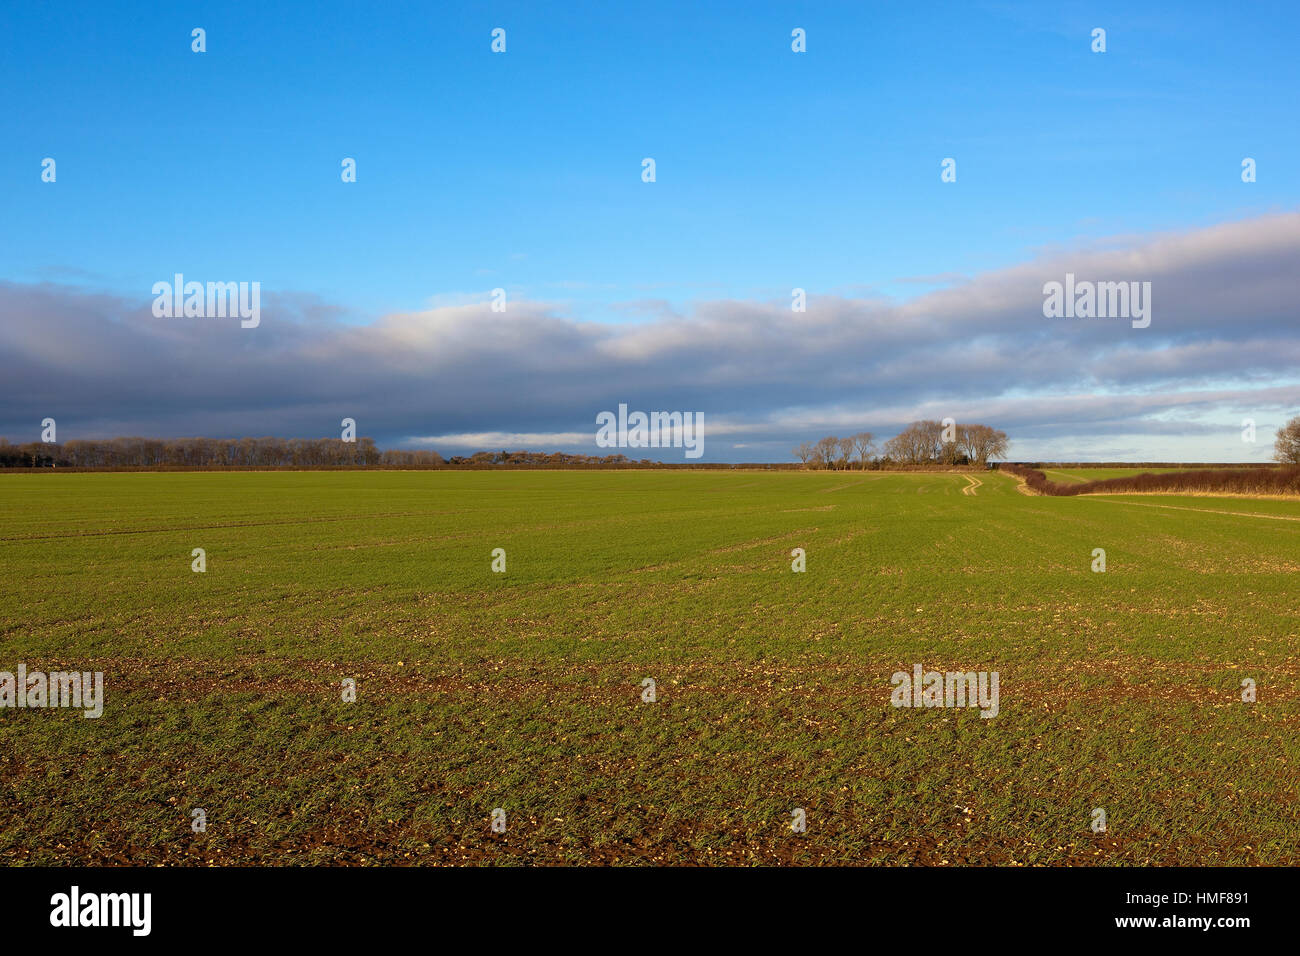 Green fields, trees and hedgerows of the scenic Yorkshire wolds landscape in winter. Stock Photo